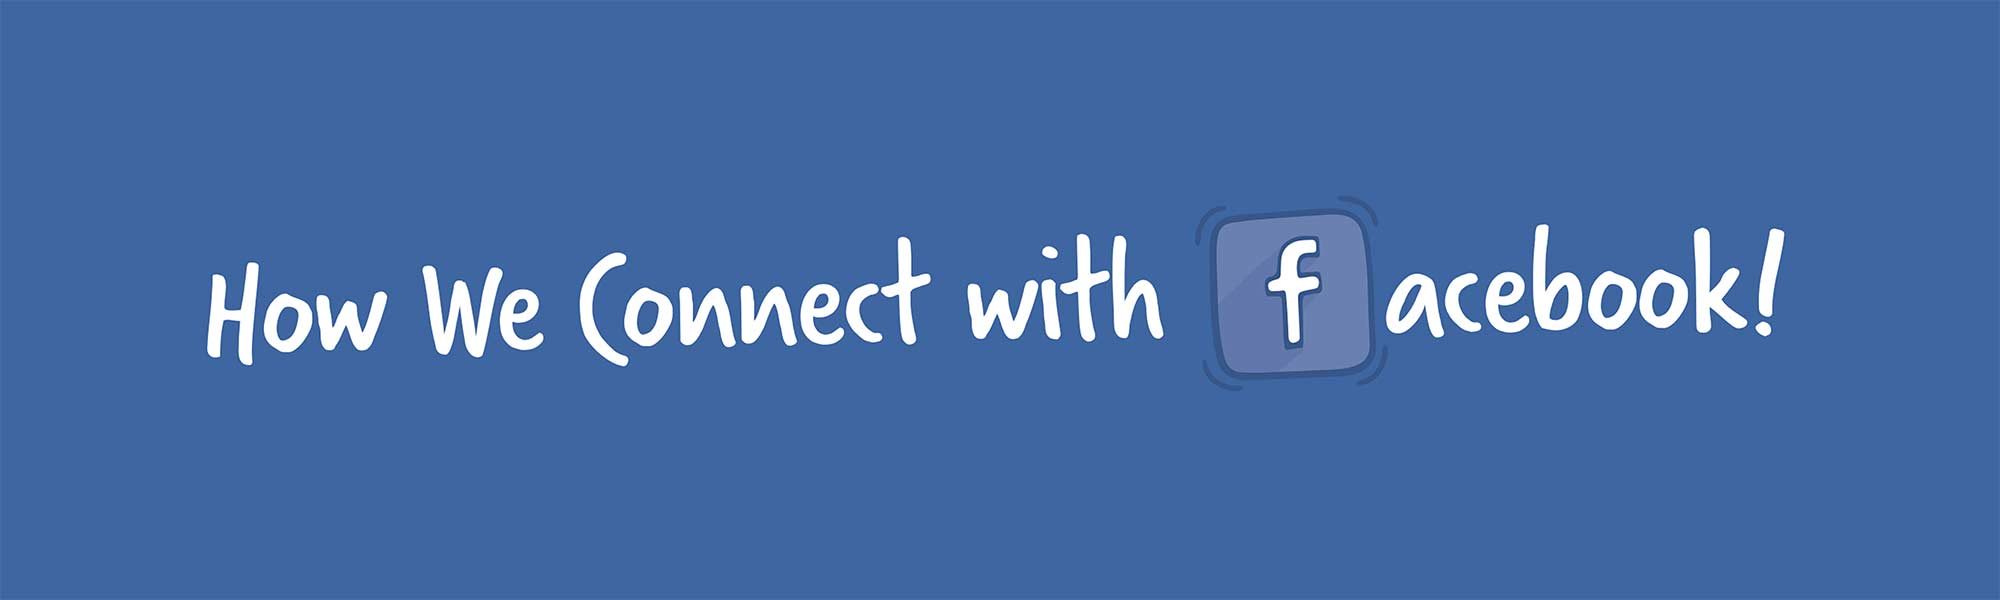 How we connect with Facebook banner hero